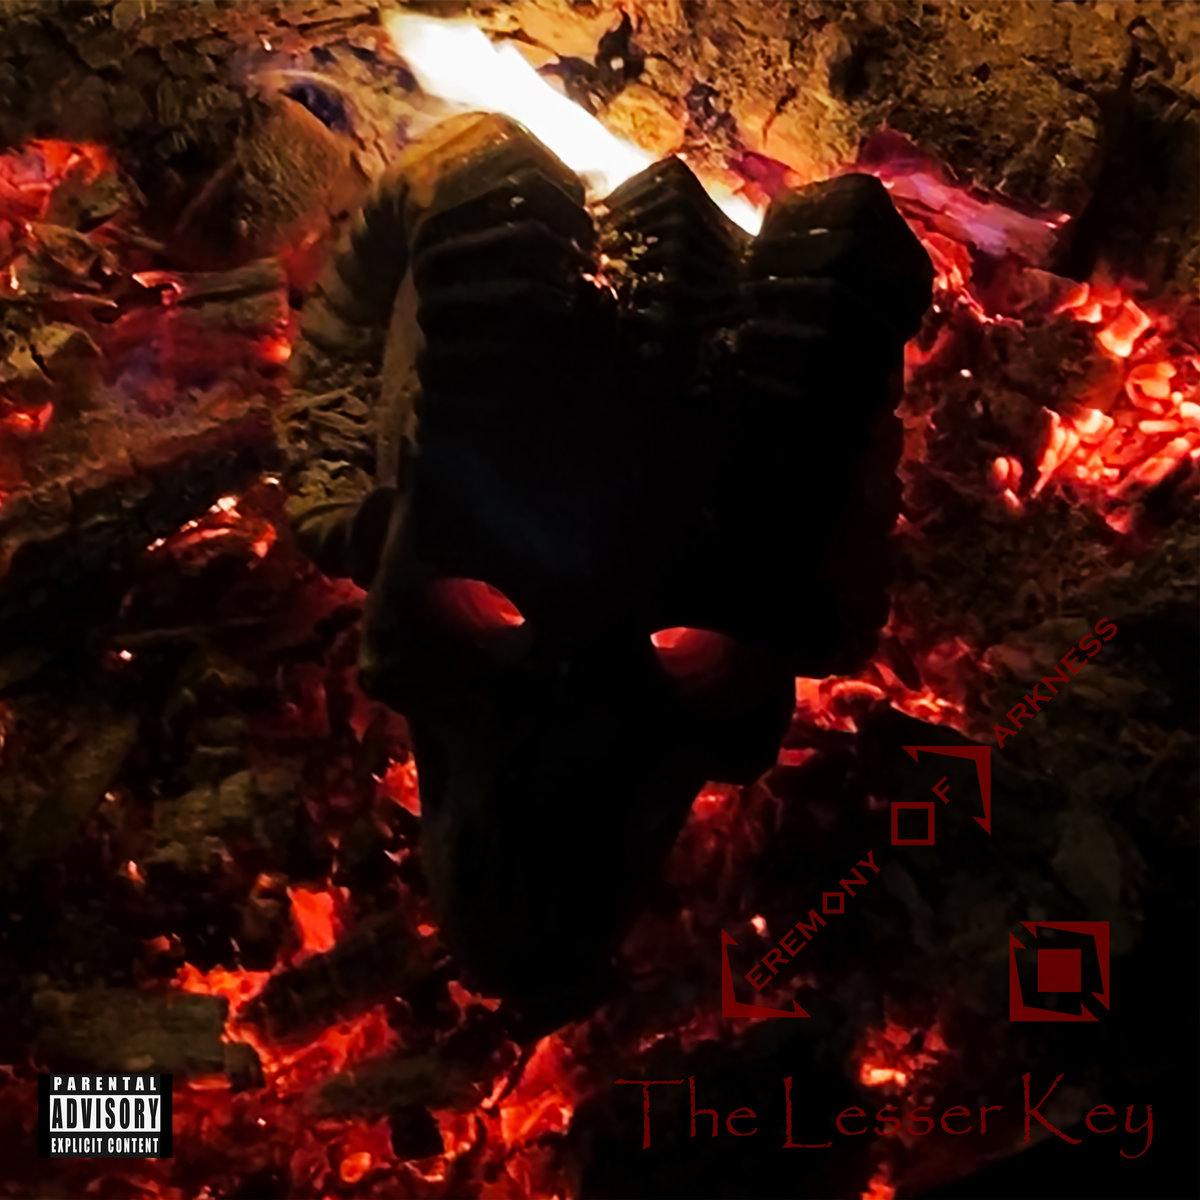 Ceremony of Darkness - "The Lesser Key" - 2023